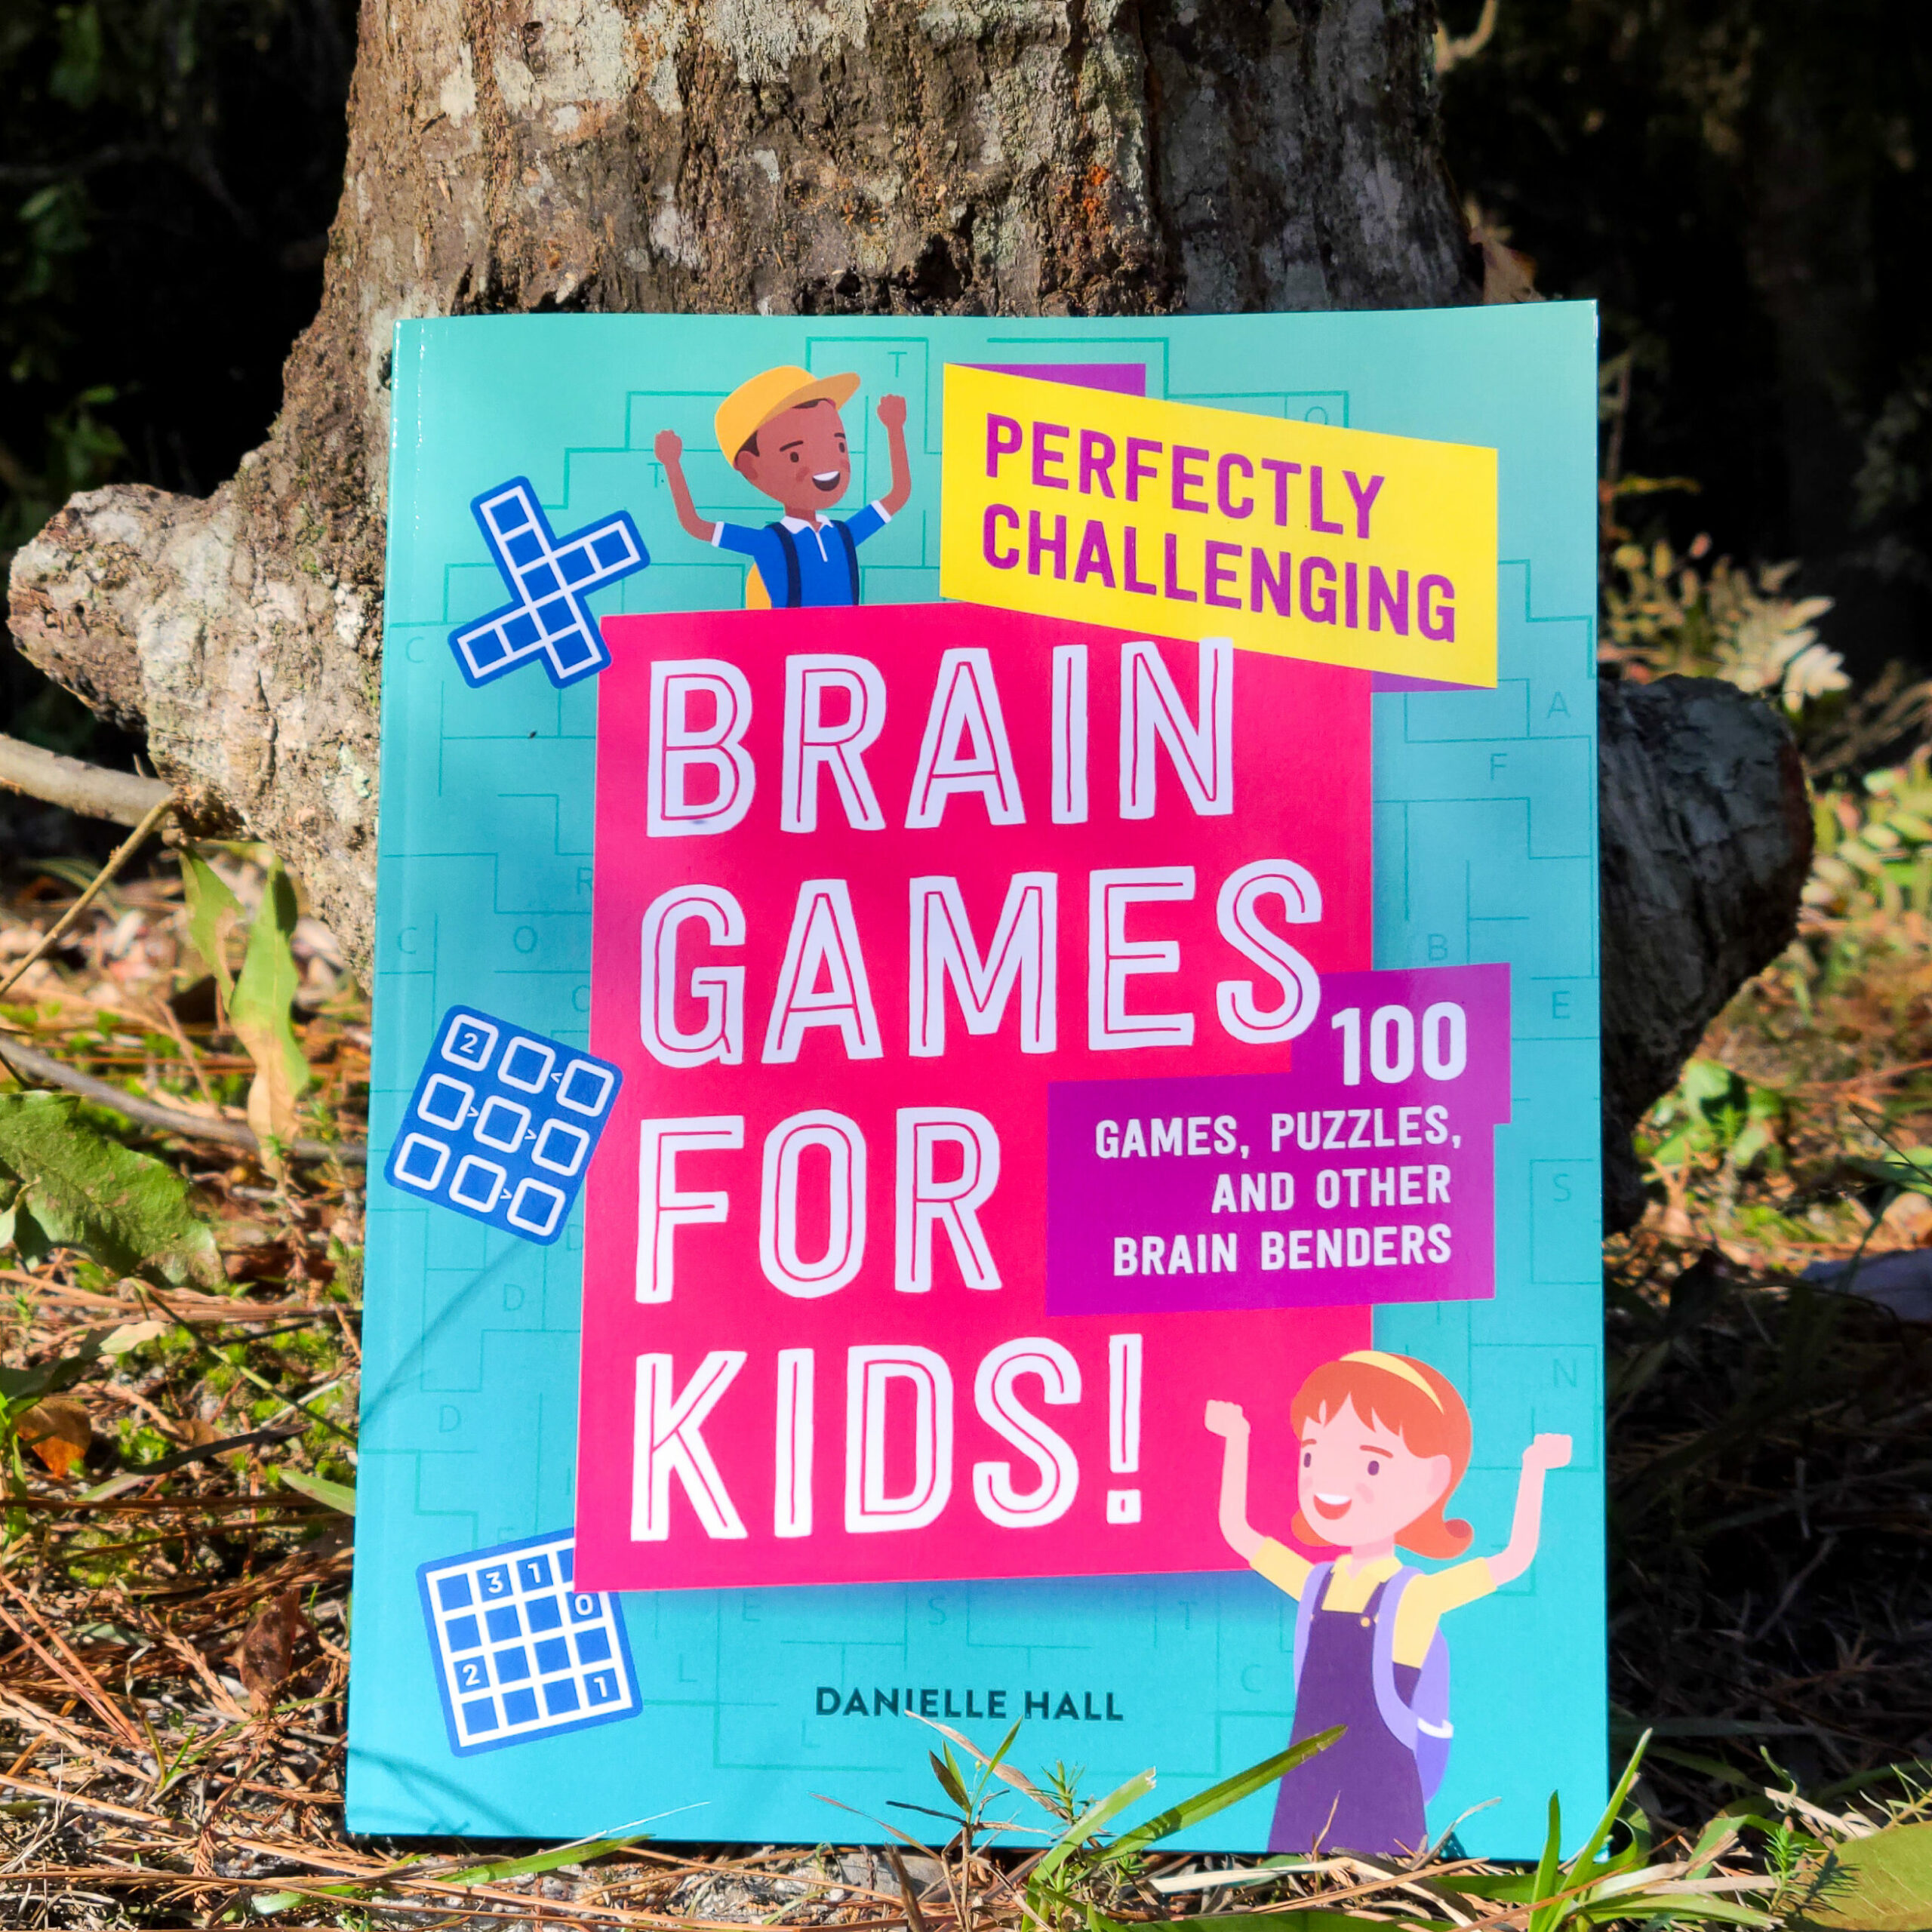 The book Perfectly Challenging Brain Games for Kids sits against a tree. The book is teal with a pink text box.